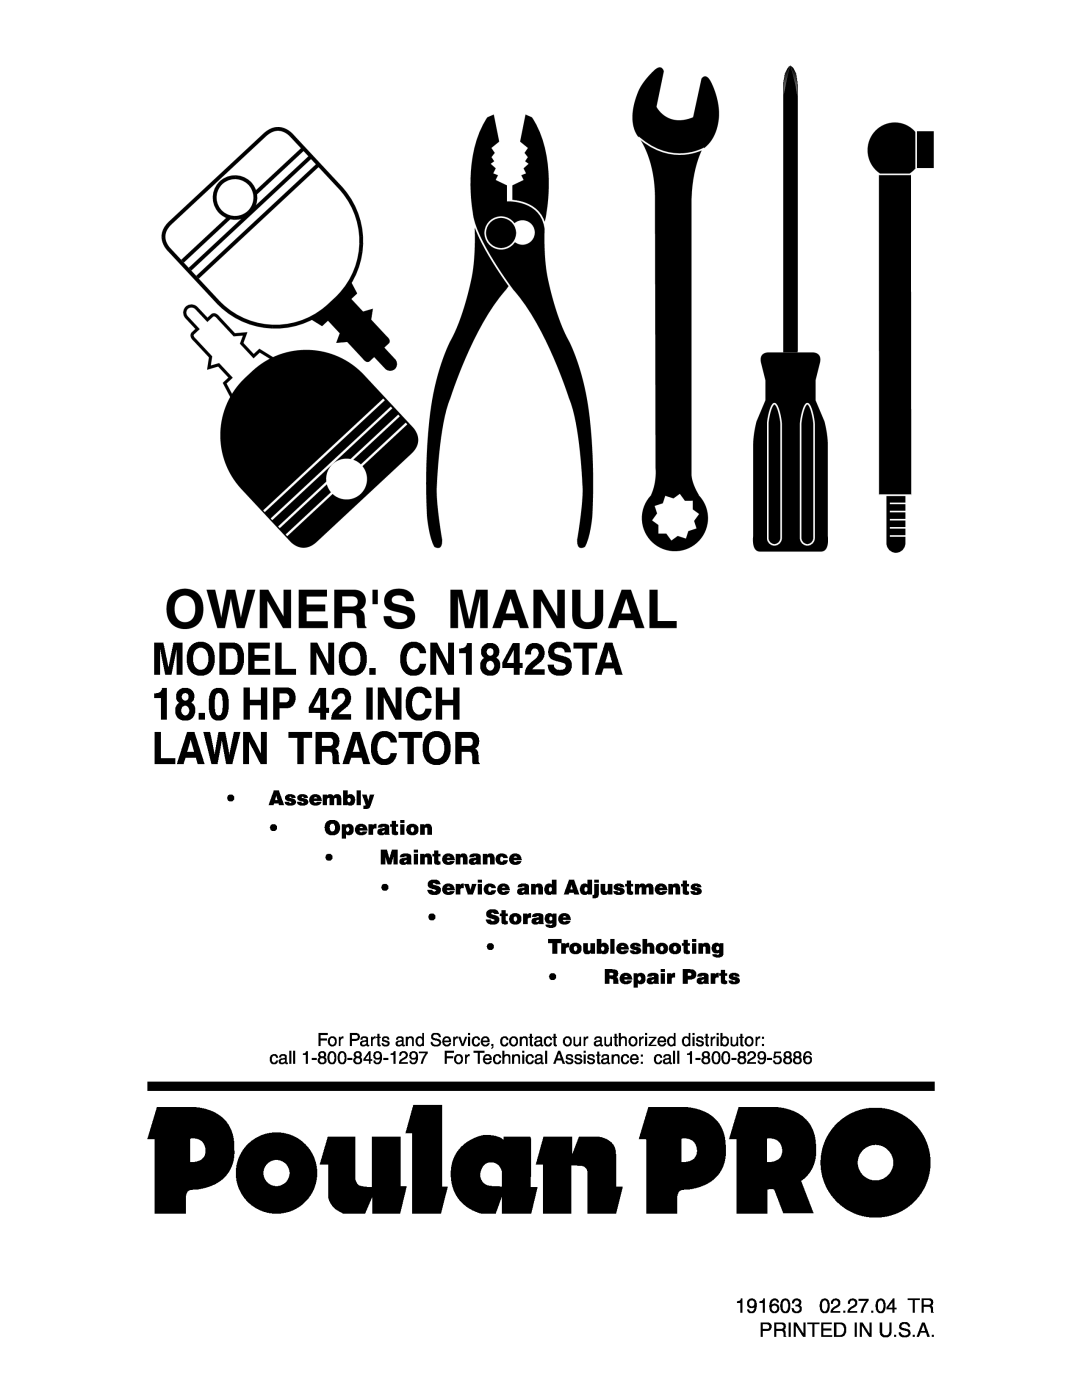 Poulan 191603 manual Assembly Operation Maintenance Service and Adjustments Storage, Troubleshooting Repair Parts 